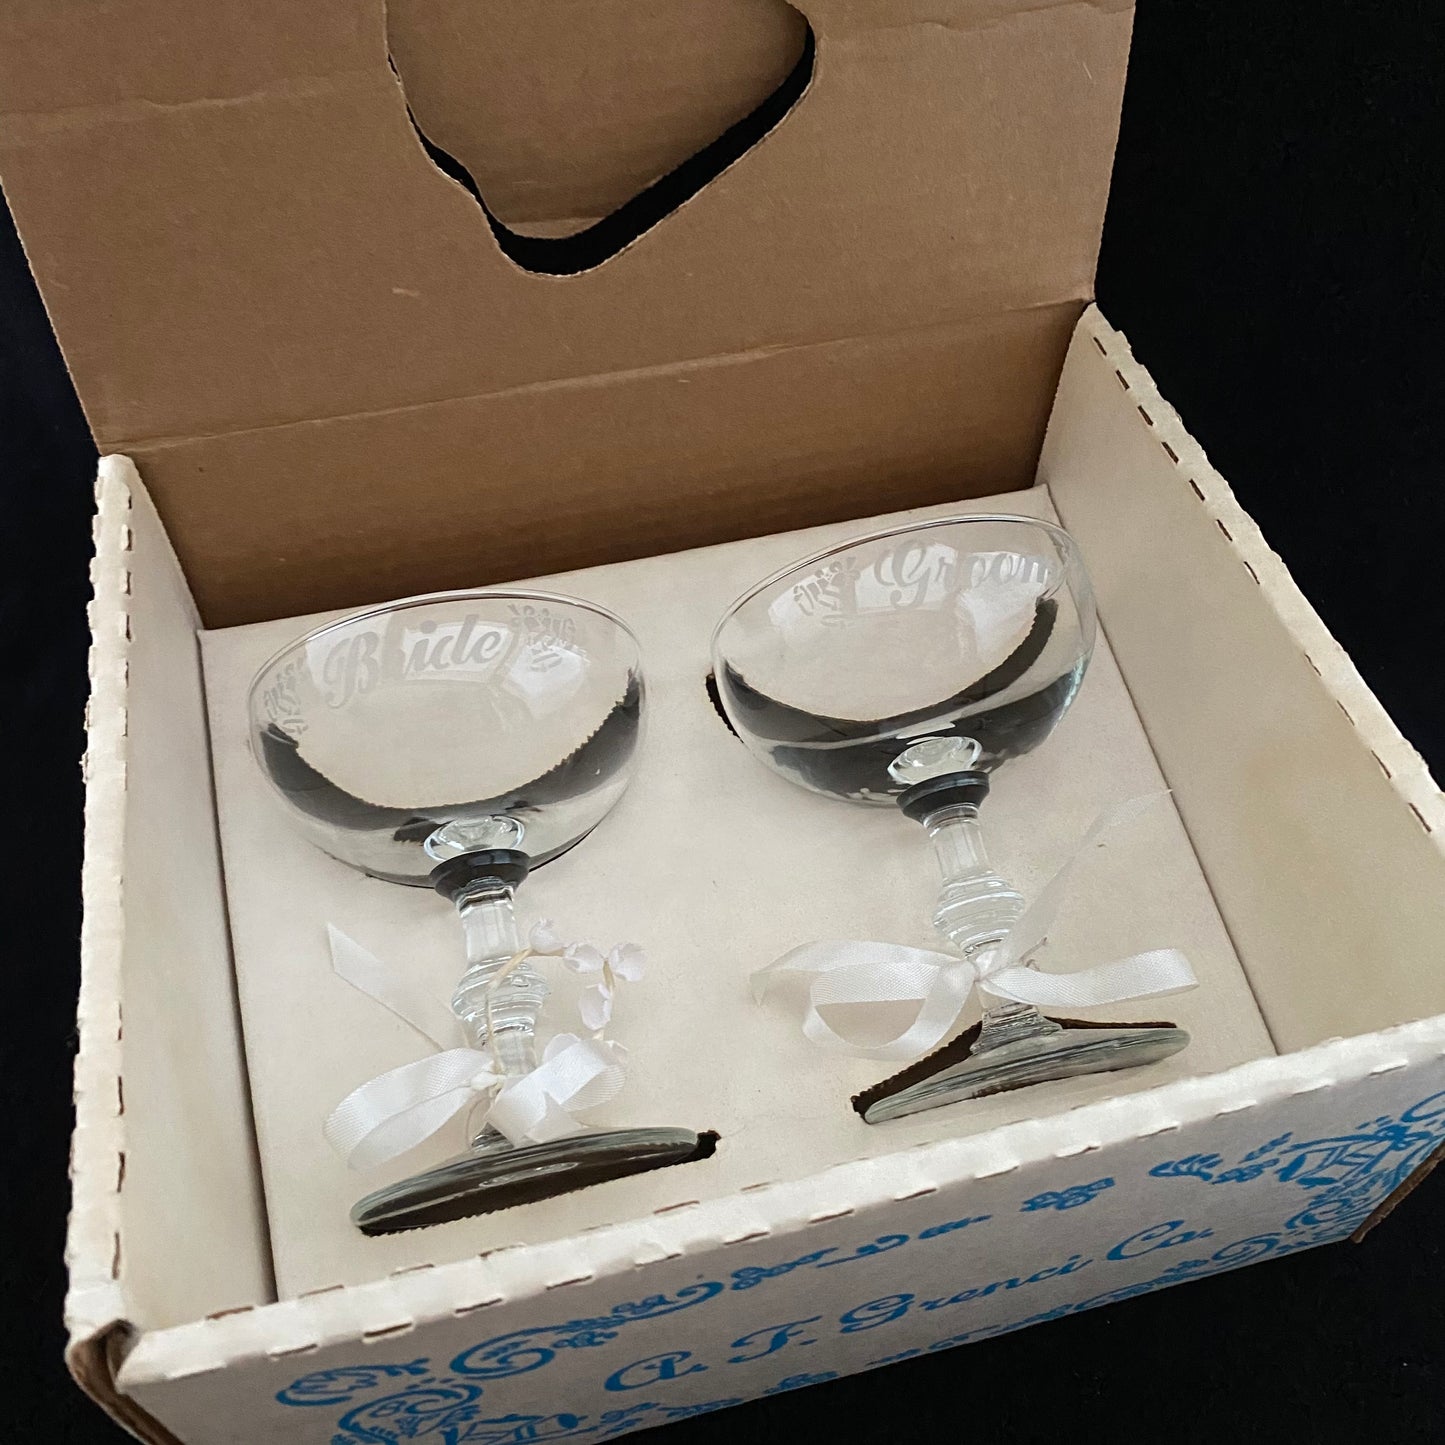 1950s Bride & Groom Champagne Glasses With Their Original Box